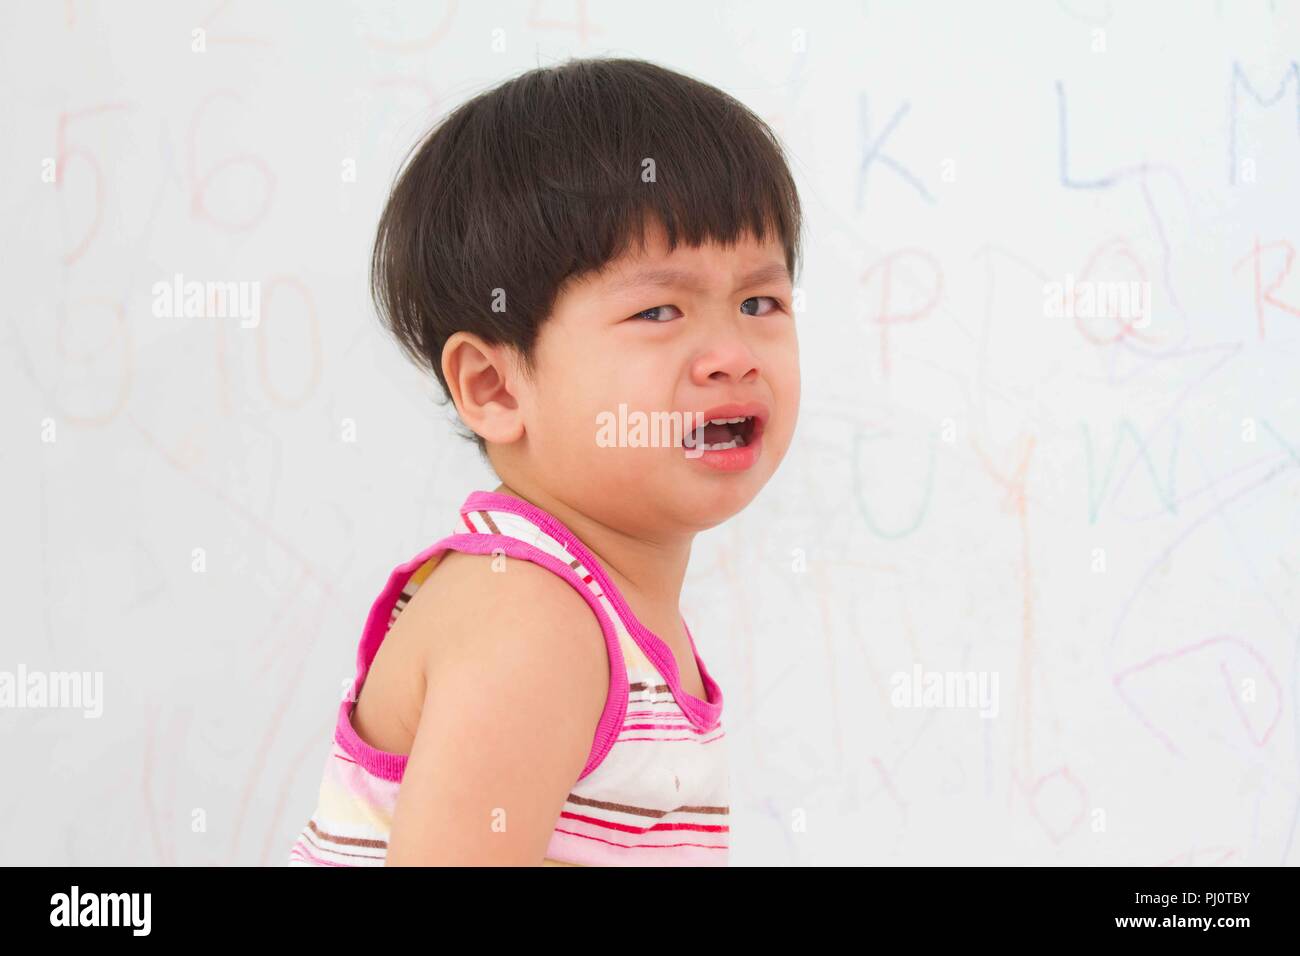 little boy crying on wall dry background, Stock Photo